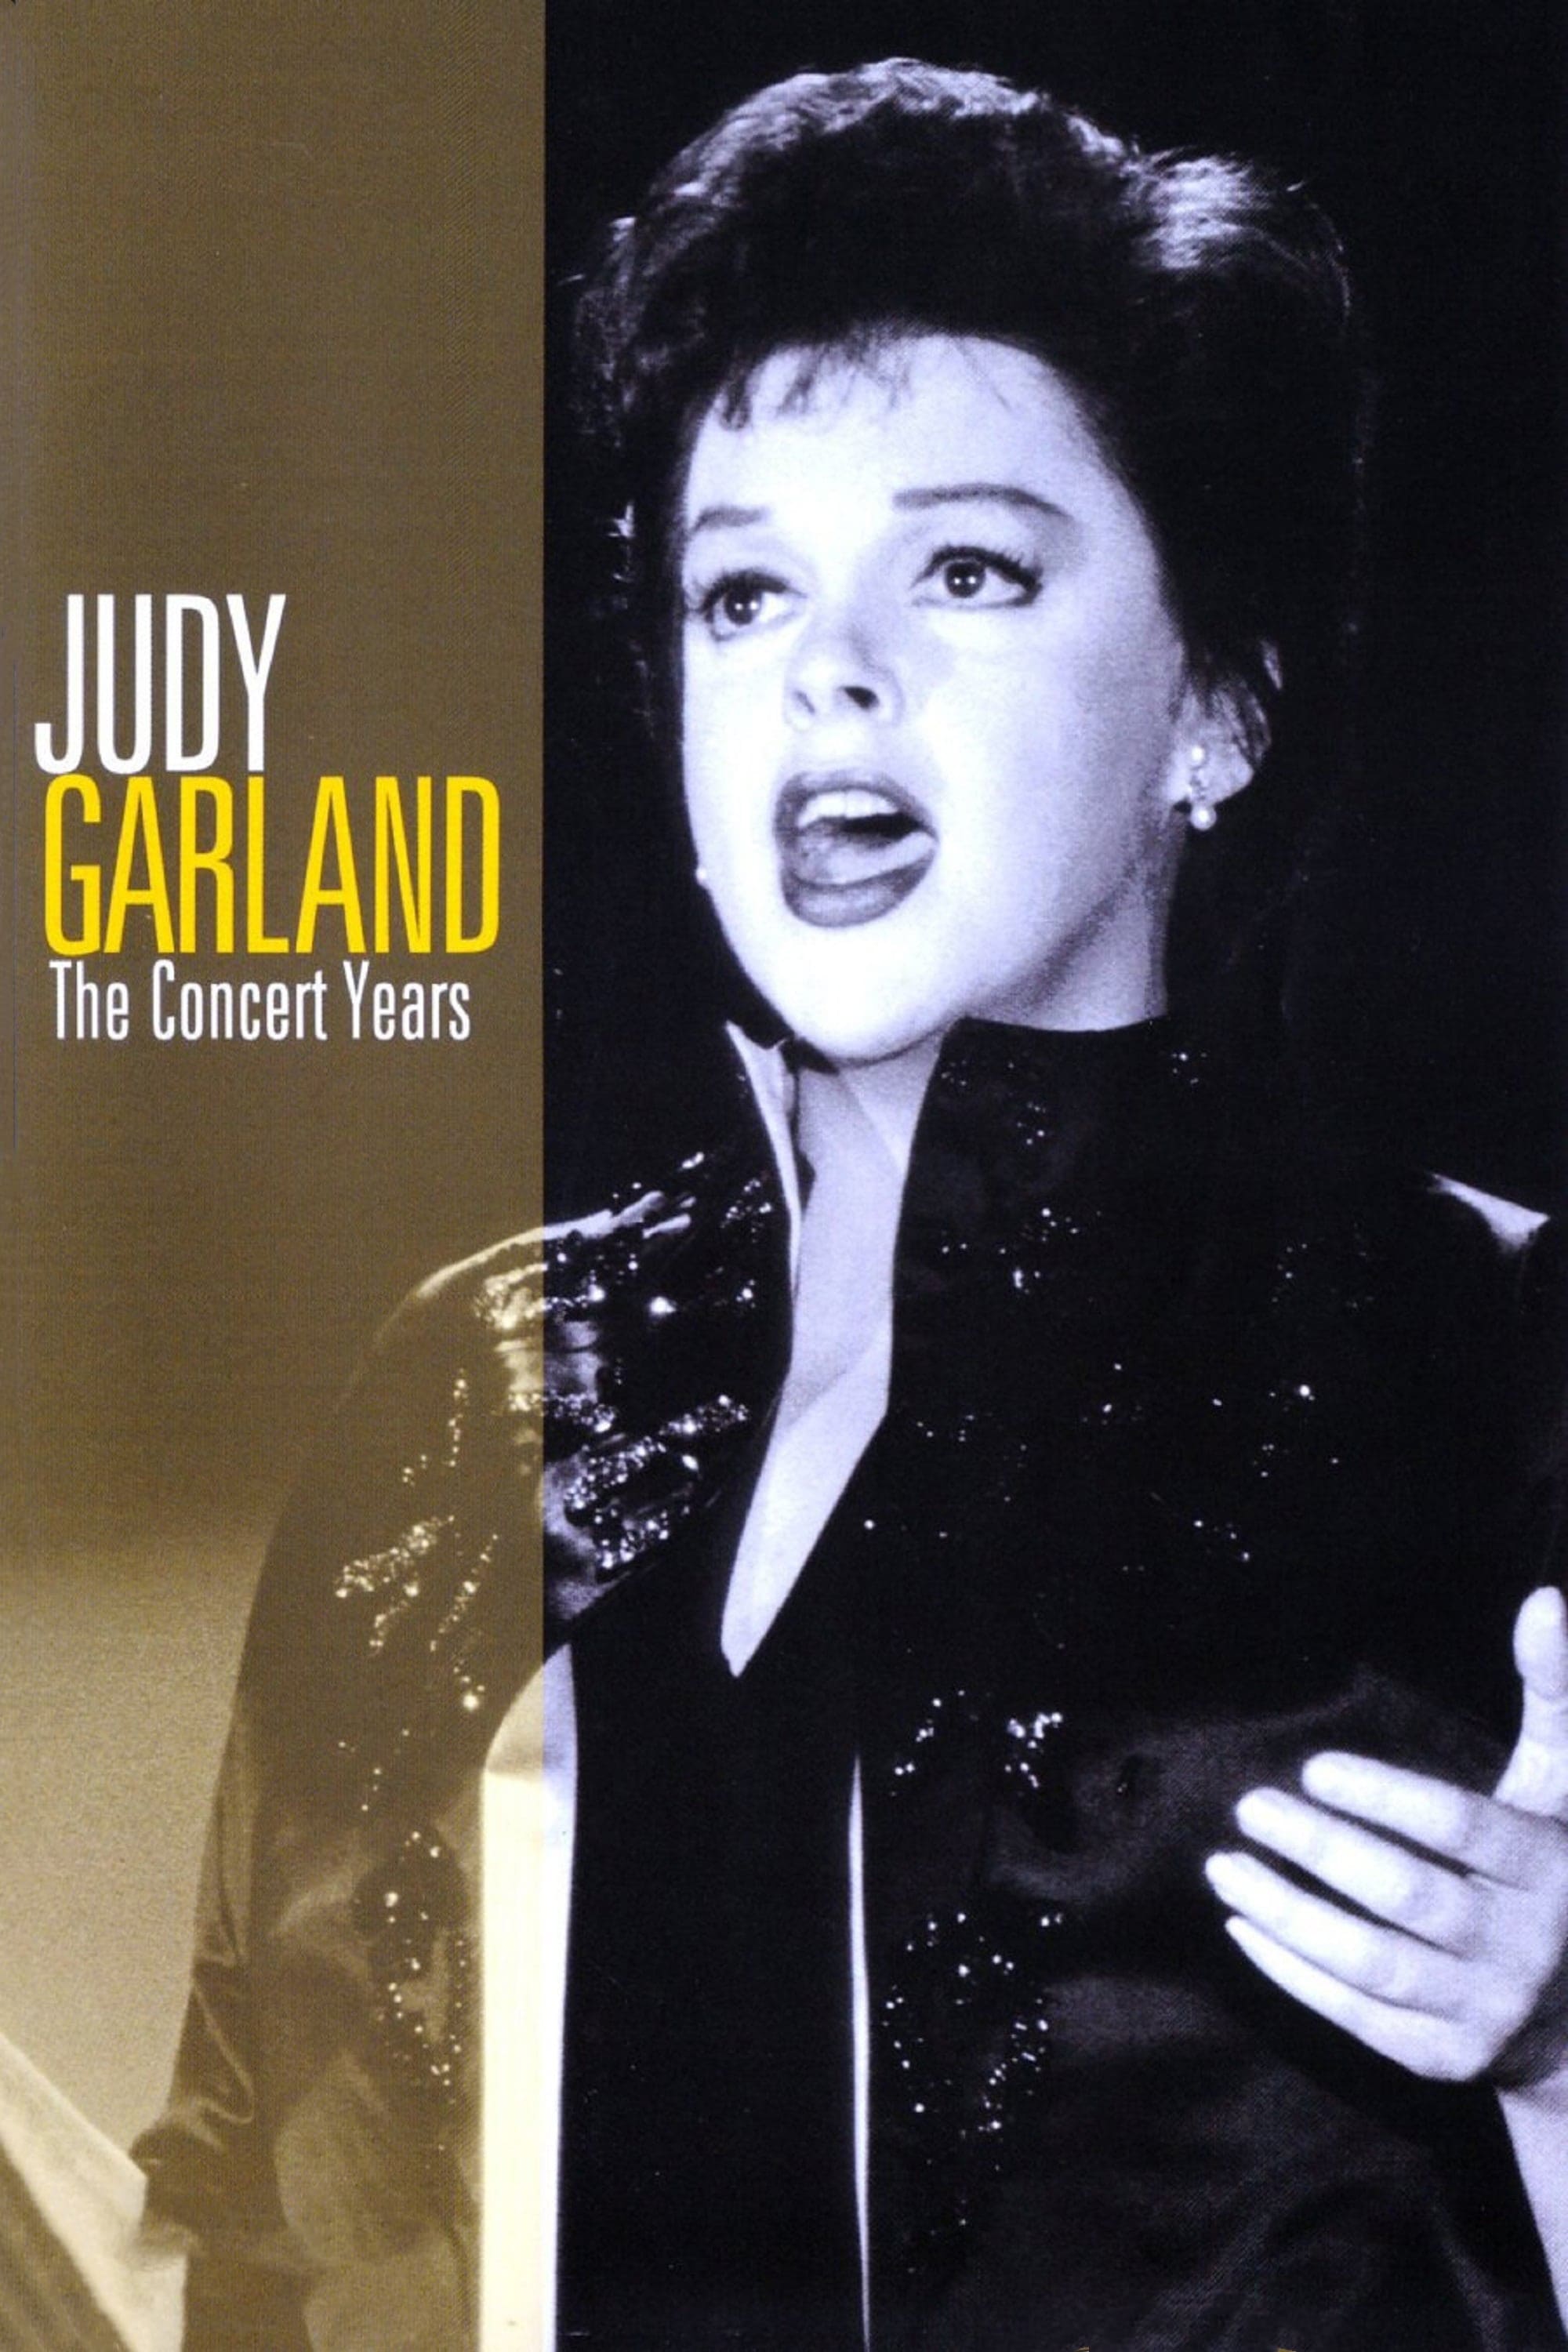 Judy Garland: The Concert Years film